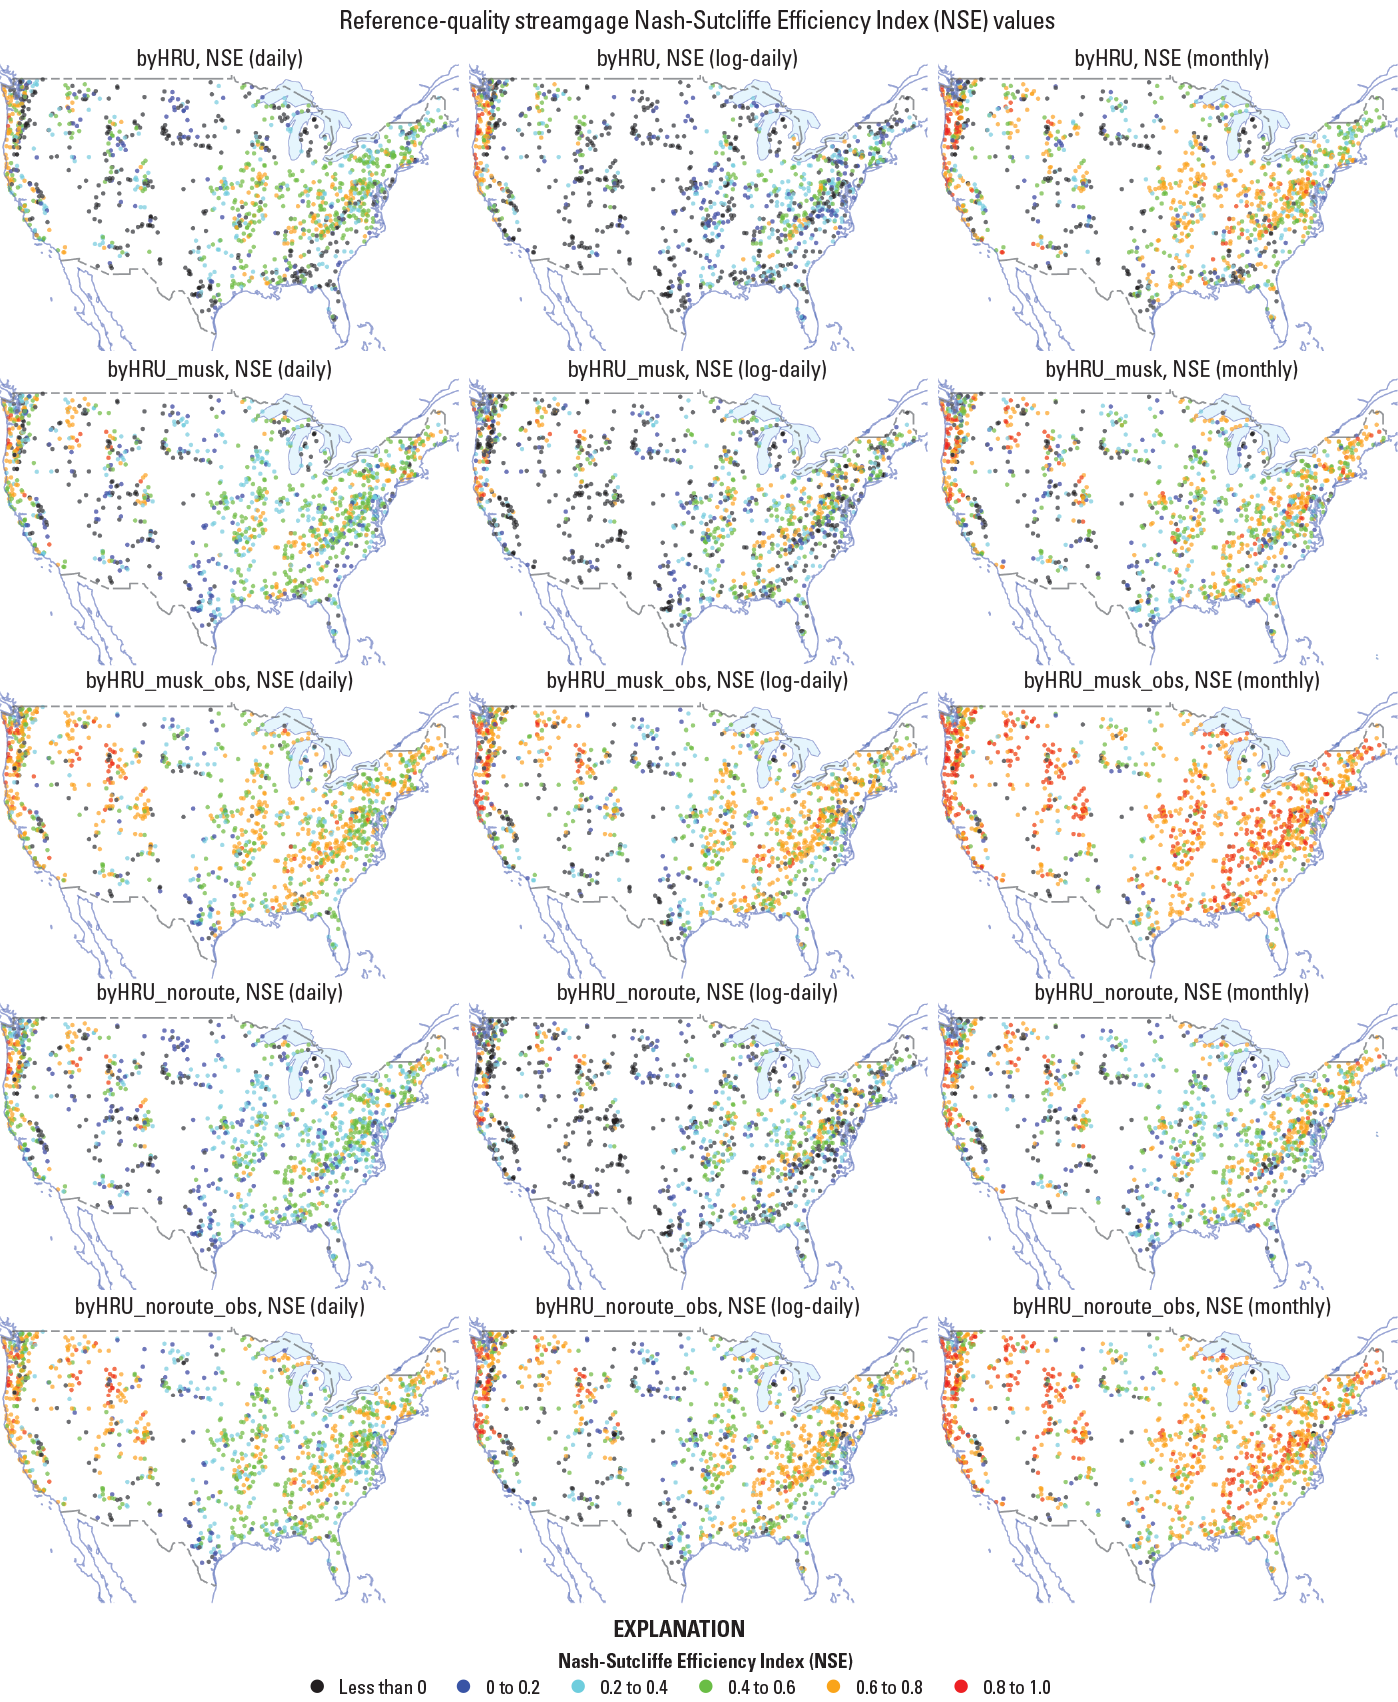 Maps of the United States organized by calibration and time step, with colored dots
                        showing the location of a reference-quality streamgage